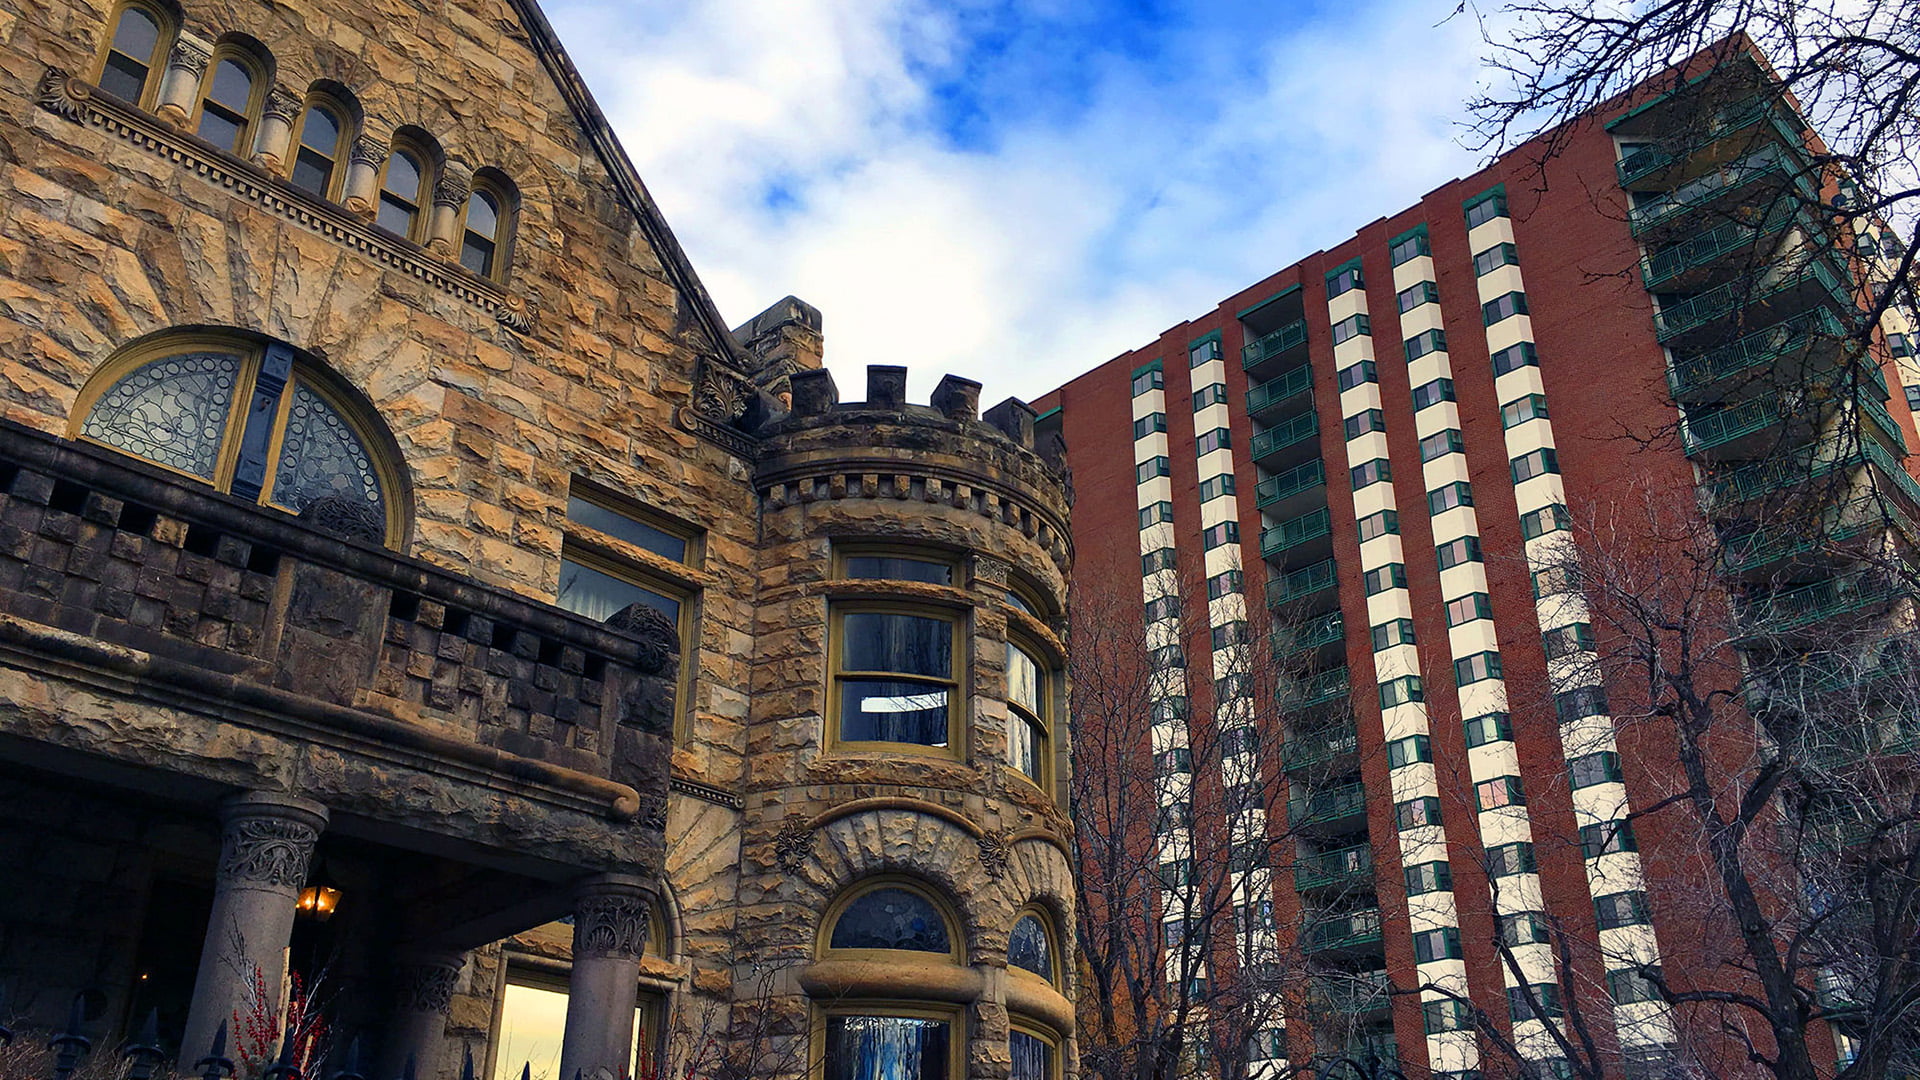 Historic brick building next to high-rise residential building. Sky is blue and partly cloudy. Trees in foreground are bare indicating winter